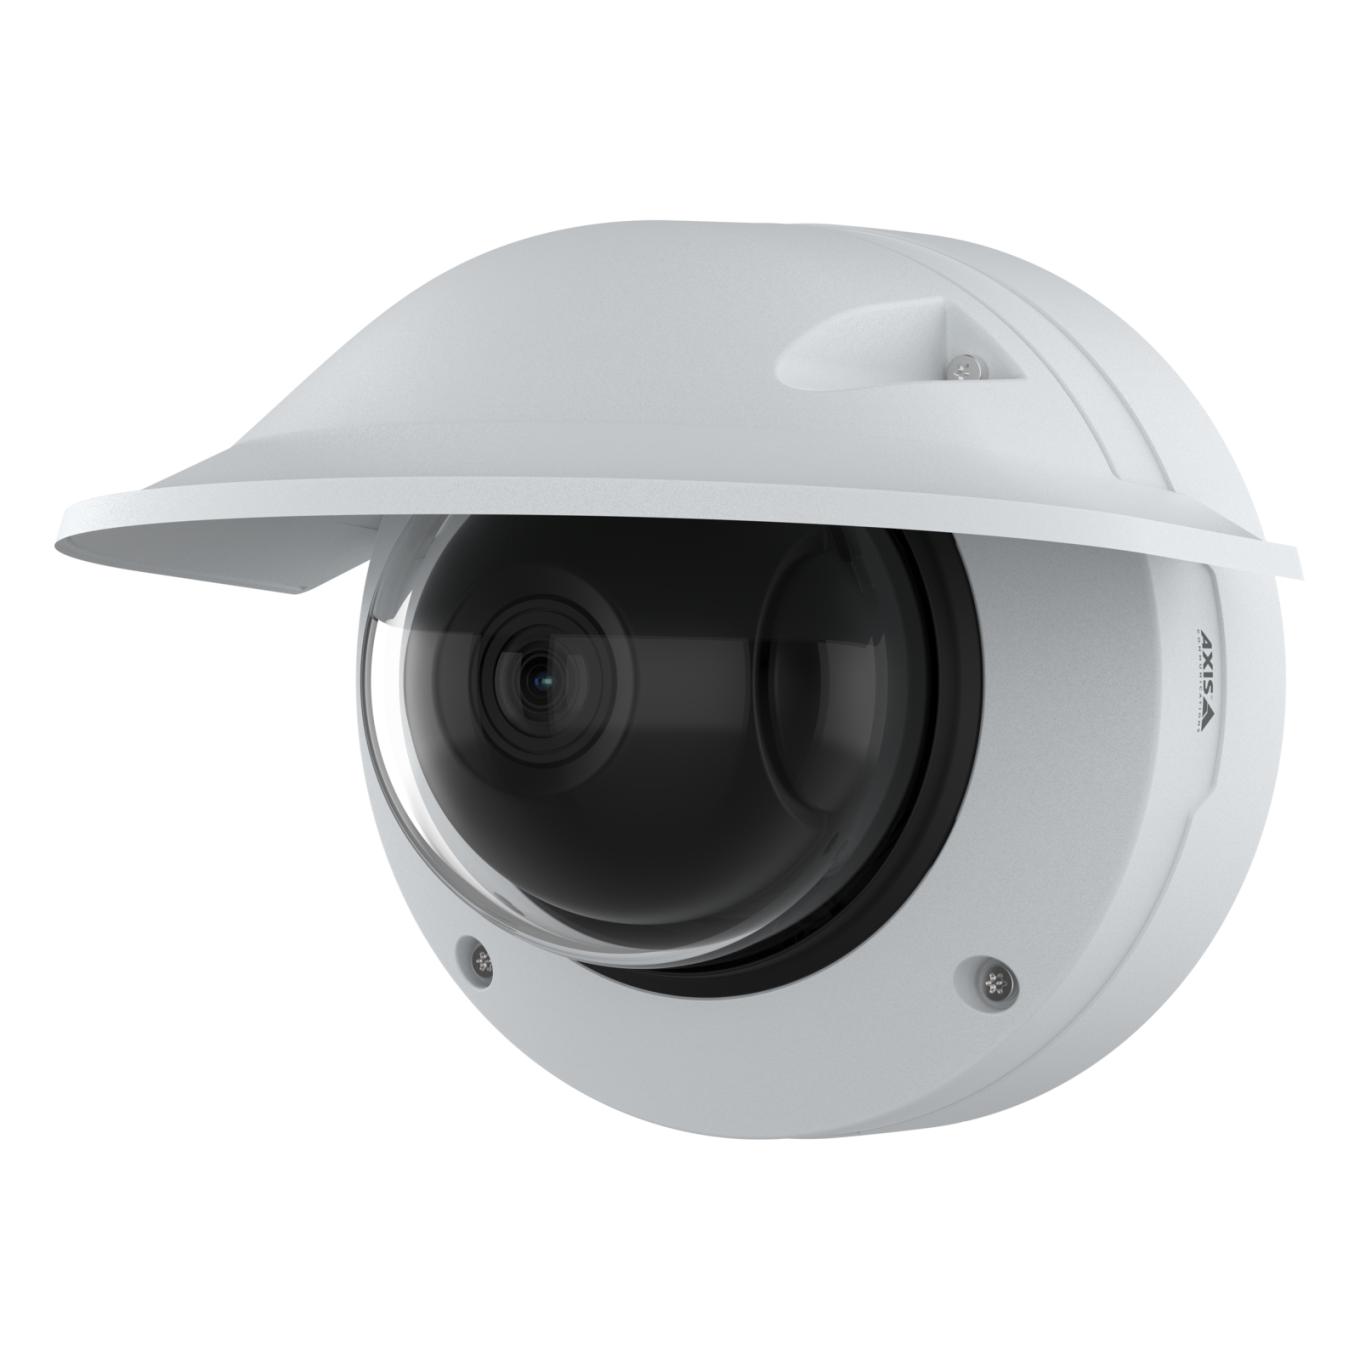 AXIS Q3628-VE Dome Camera | Axis Communications